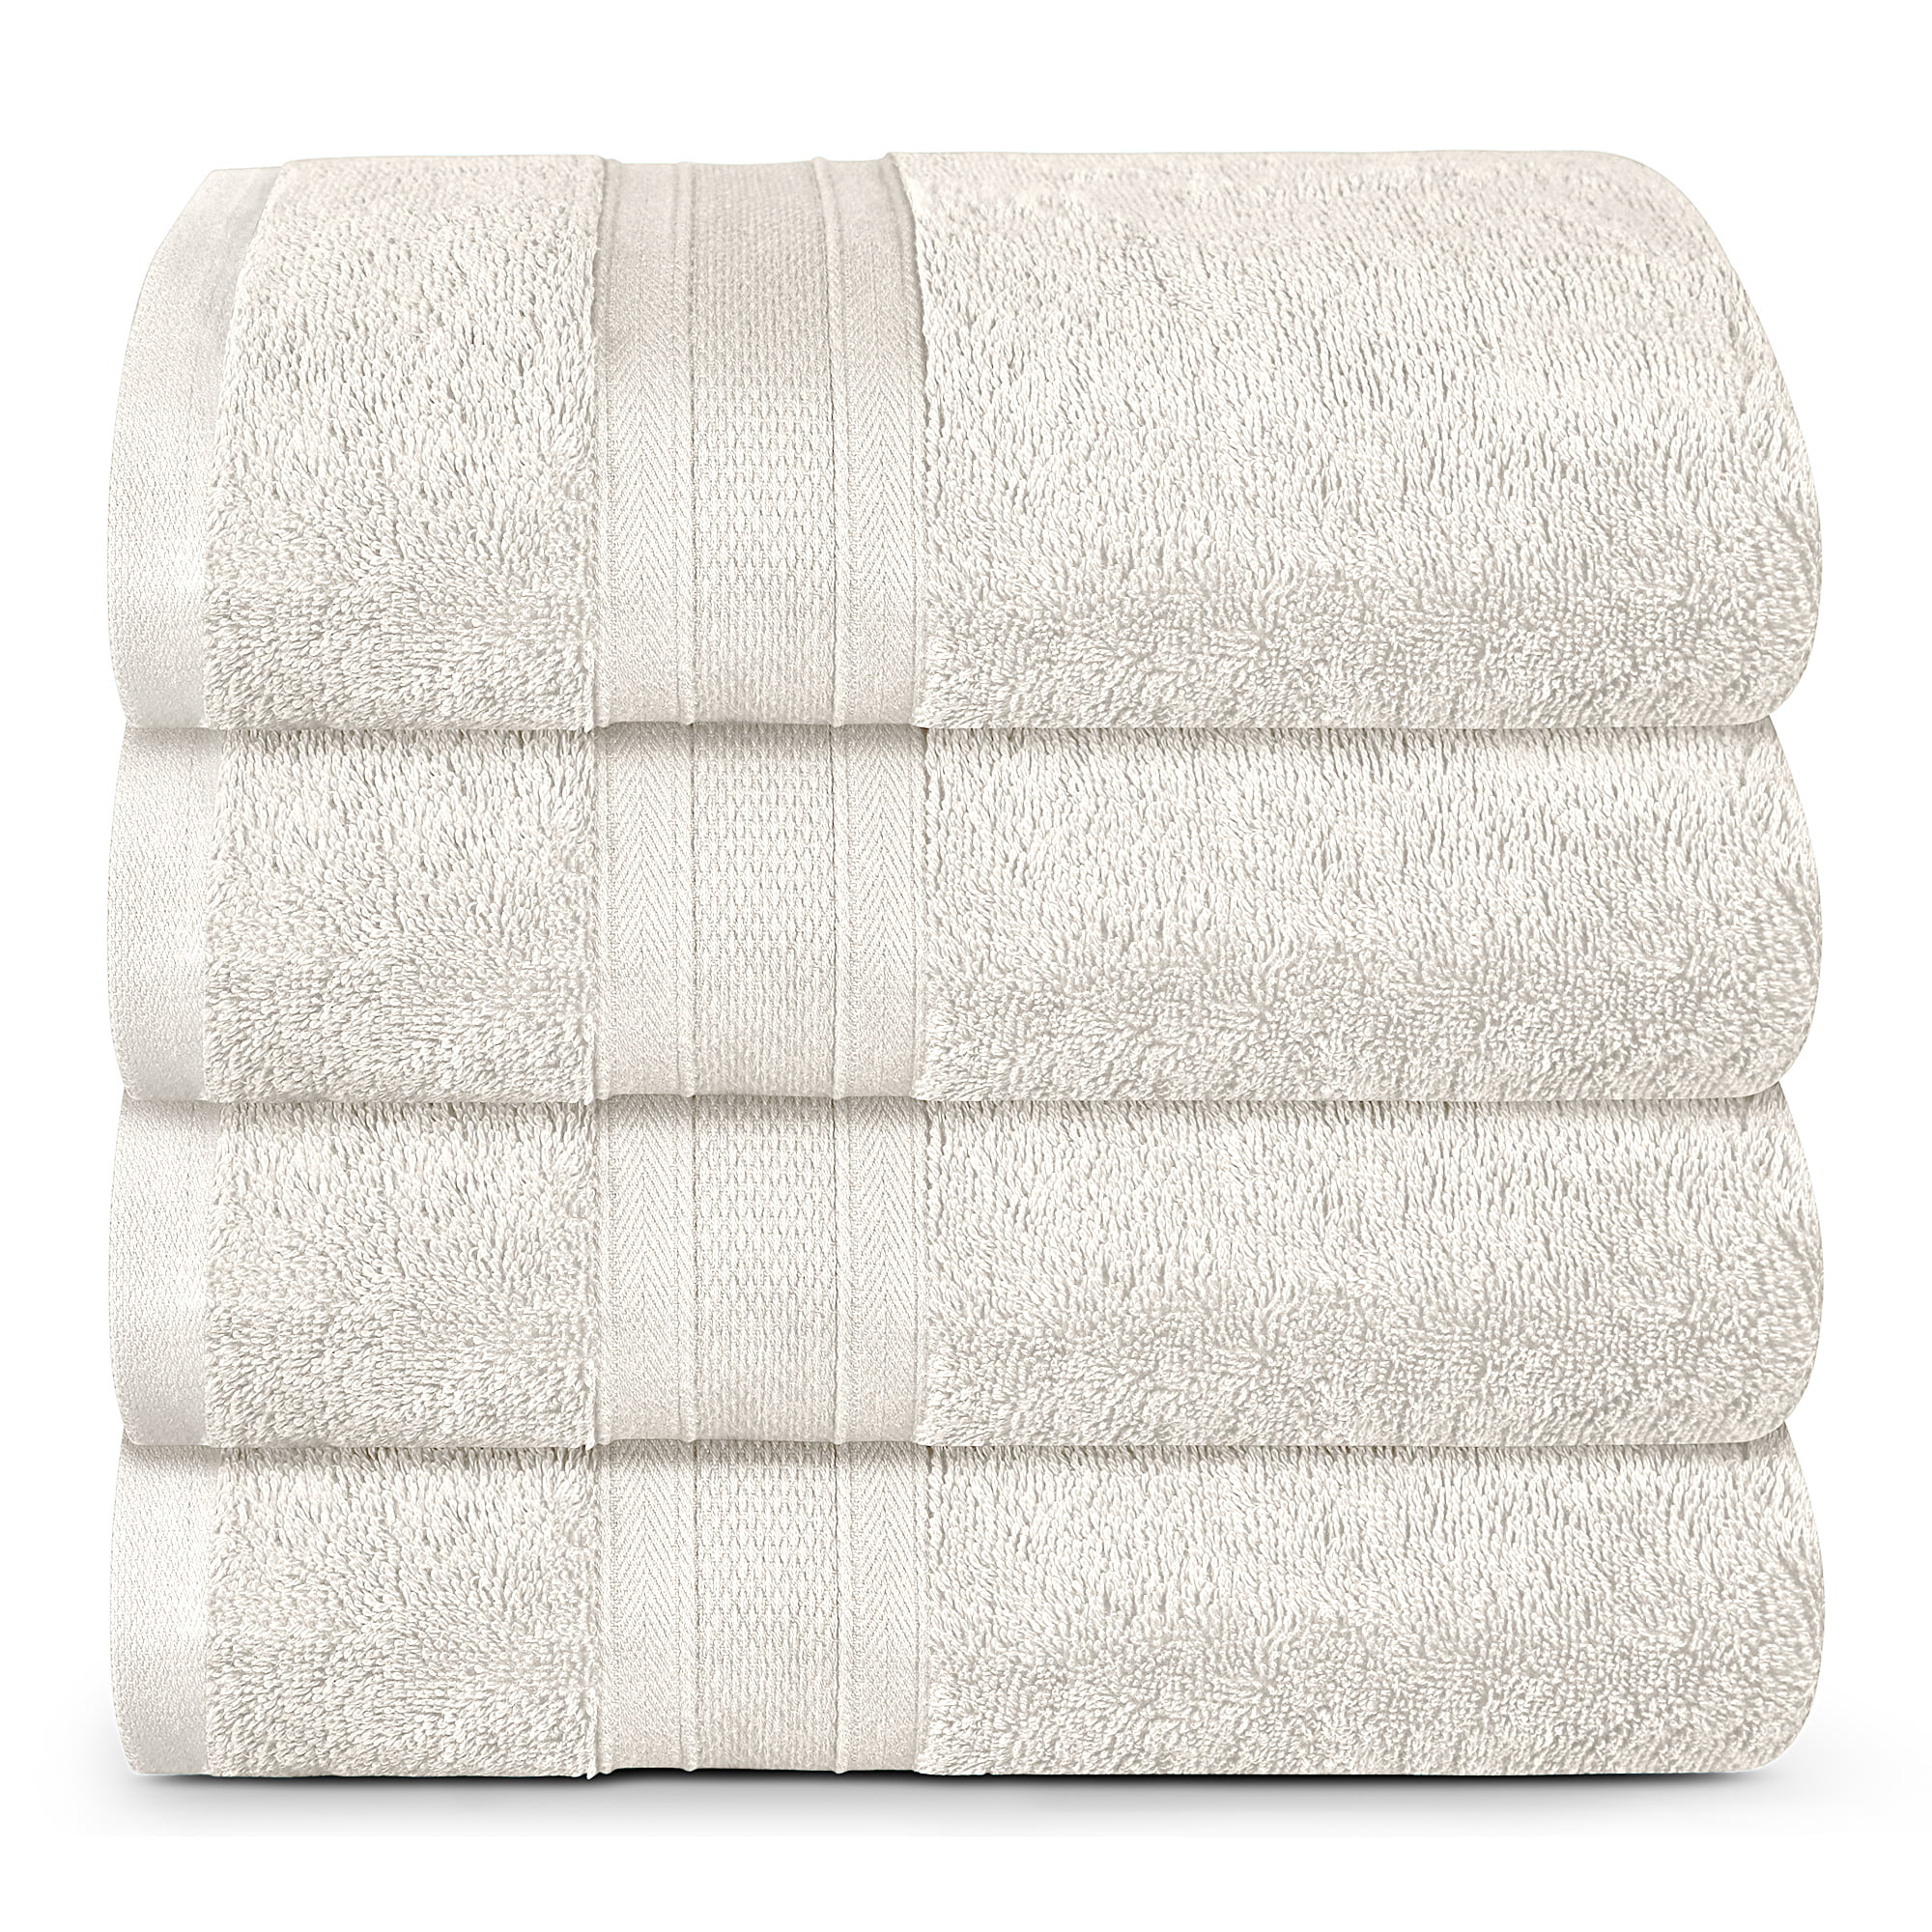  TRIDENT Towels Set of 3, 1 Bath Towel, 1 Hand Towel, 1 Wash  Cloth, Premium 100% Pure Indian Cotton, Ultra Soft Highly Absorbent Towel  Set for Bathroom, Gym, Hotel and Spa